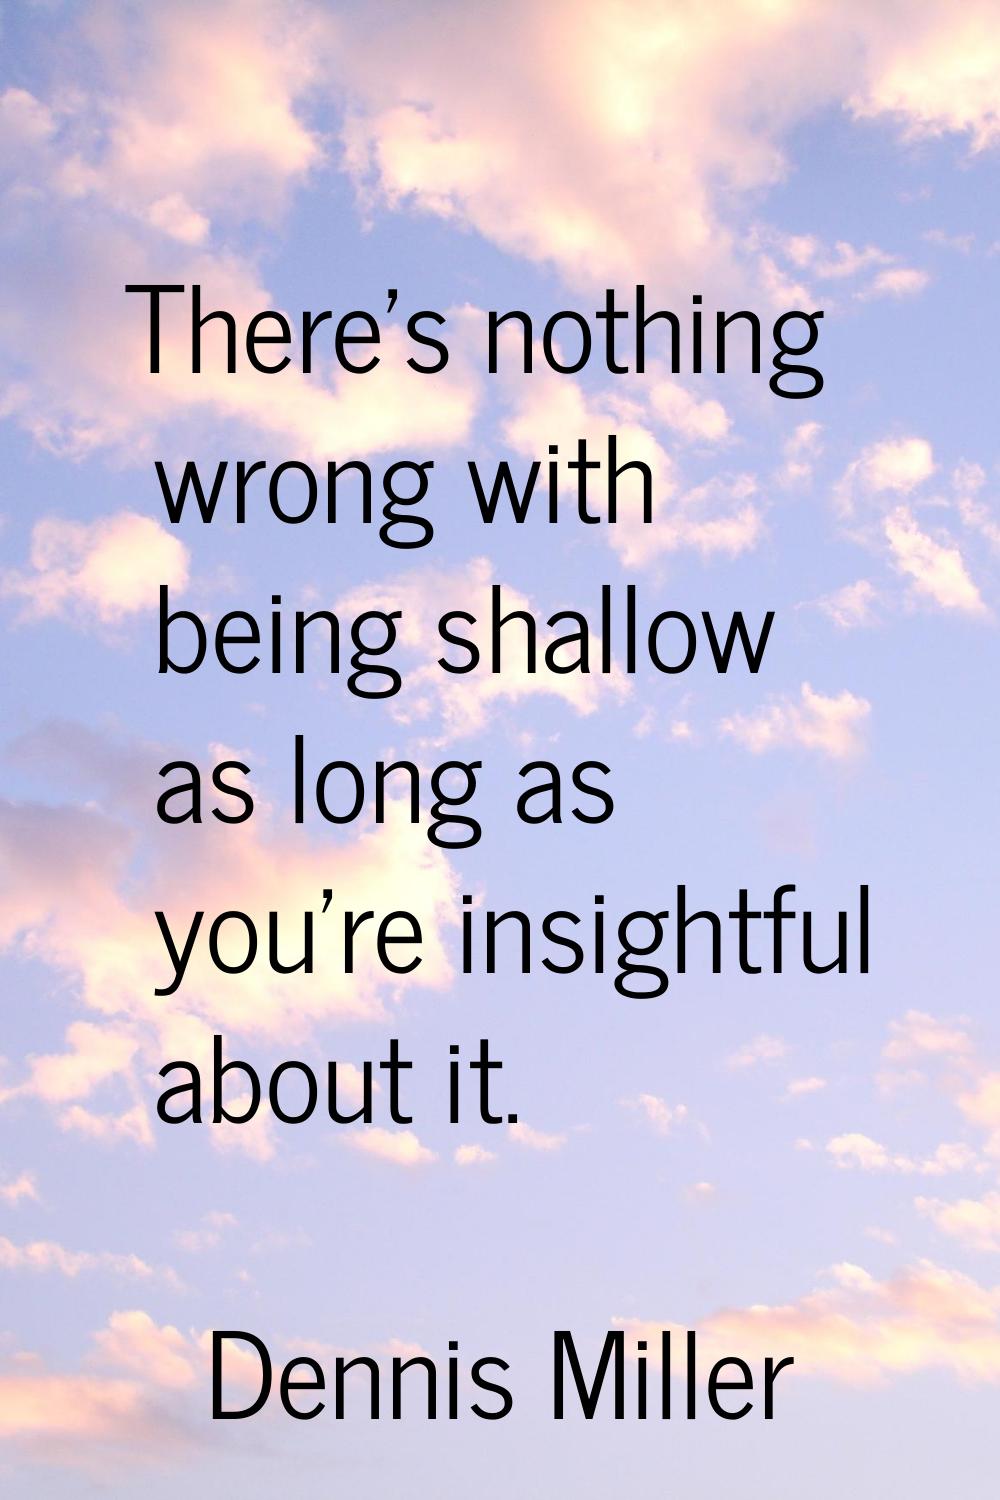 There's nothing wrong with being shallow as long as you're insightful about it.